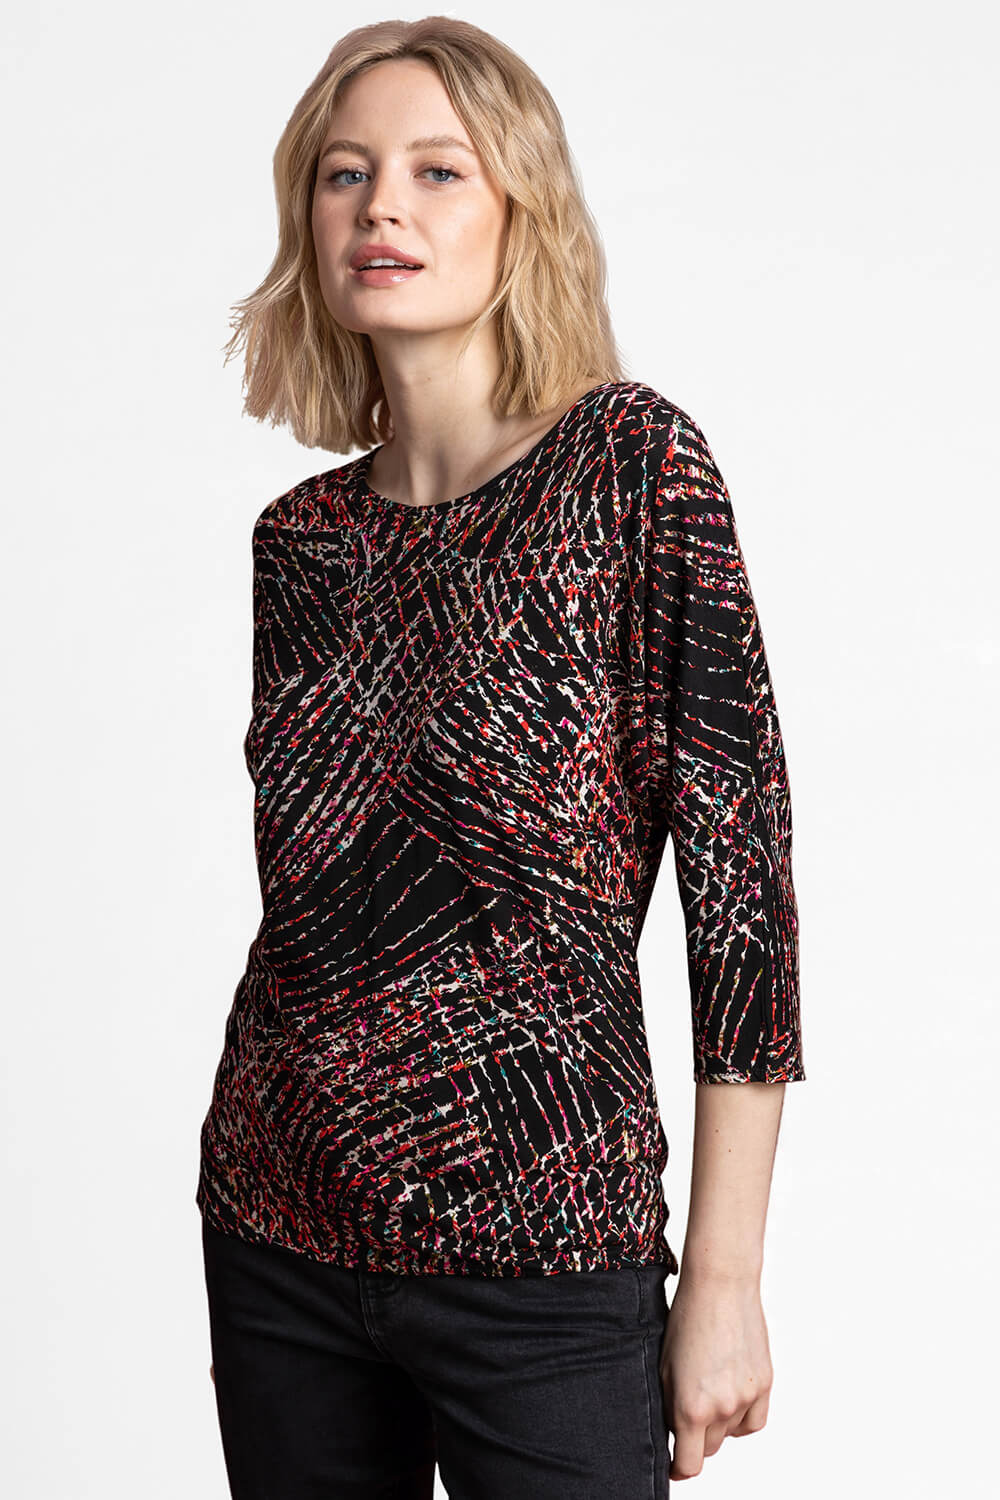 Black Textured Abstract Print Top, Image 4 of 4